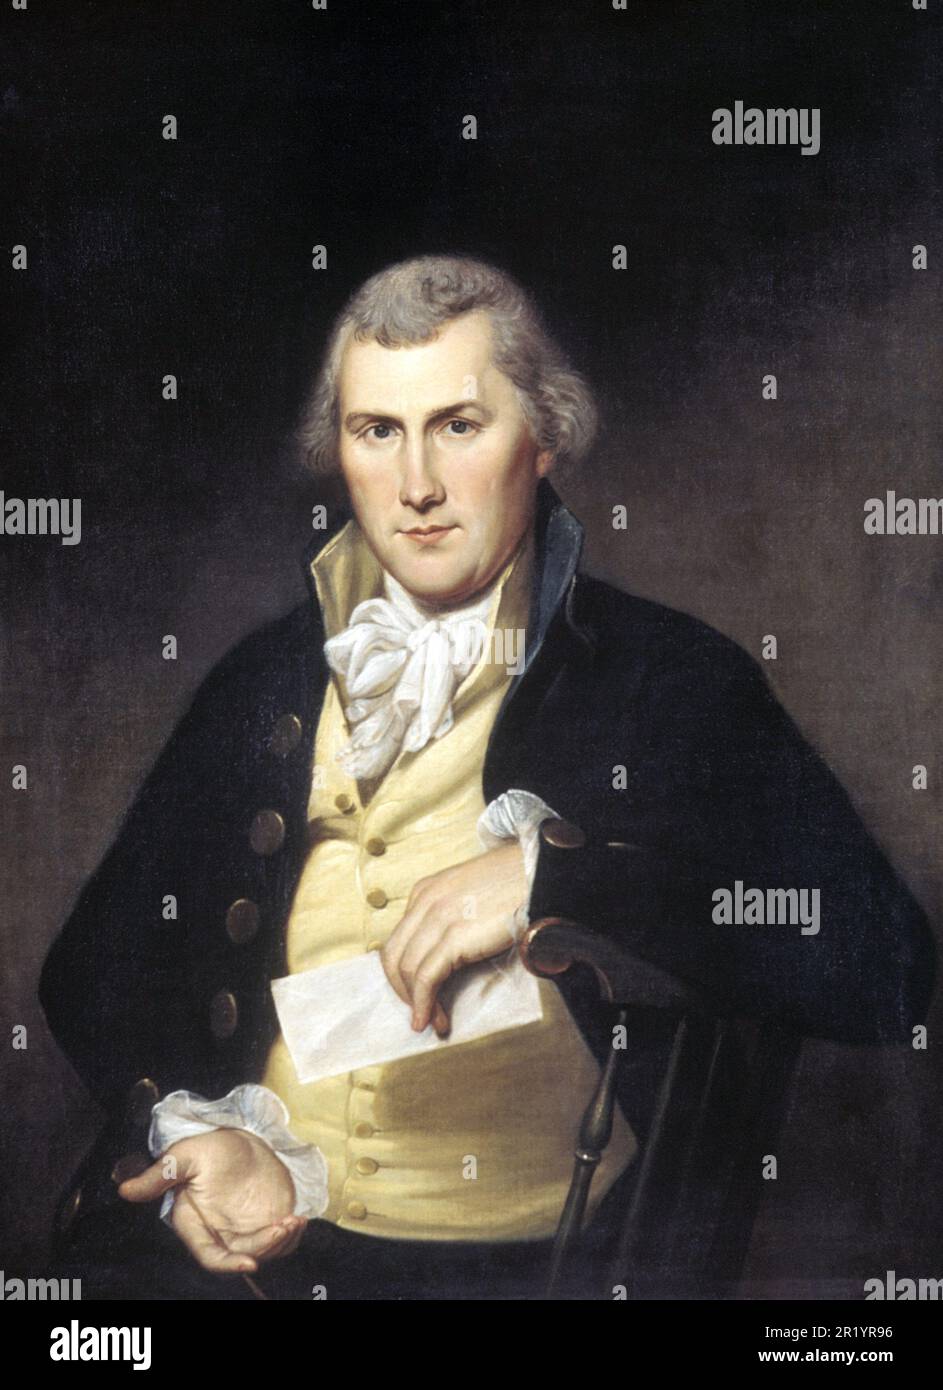 Elie Williams, 1789, Painting by Charles Willson Peale (1741-1827), Historic, digitally restored reproduction of a historic original  /  Elie Williams, 1789, Gemälde von Charles Willson Peale (1741-1827), Historisch, digital restaurierte Reproduktion einer historischen Vorlage Stock Photo